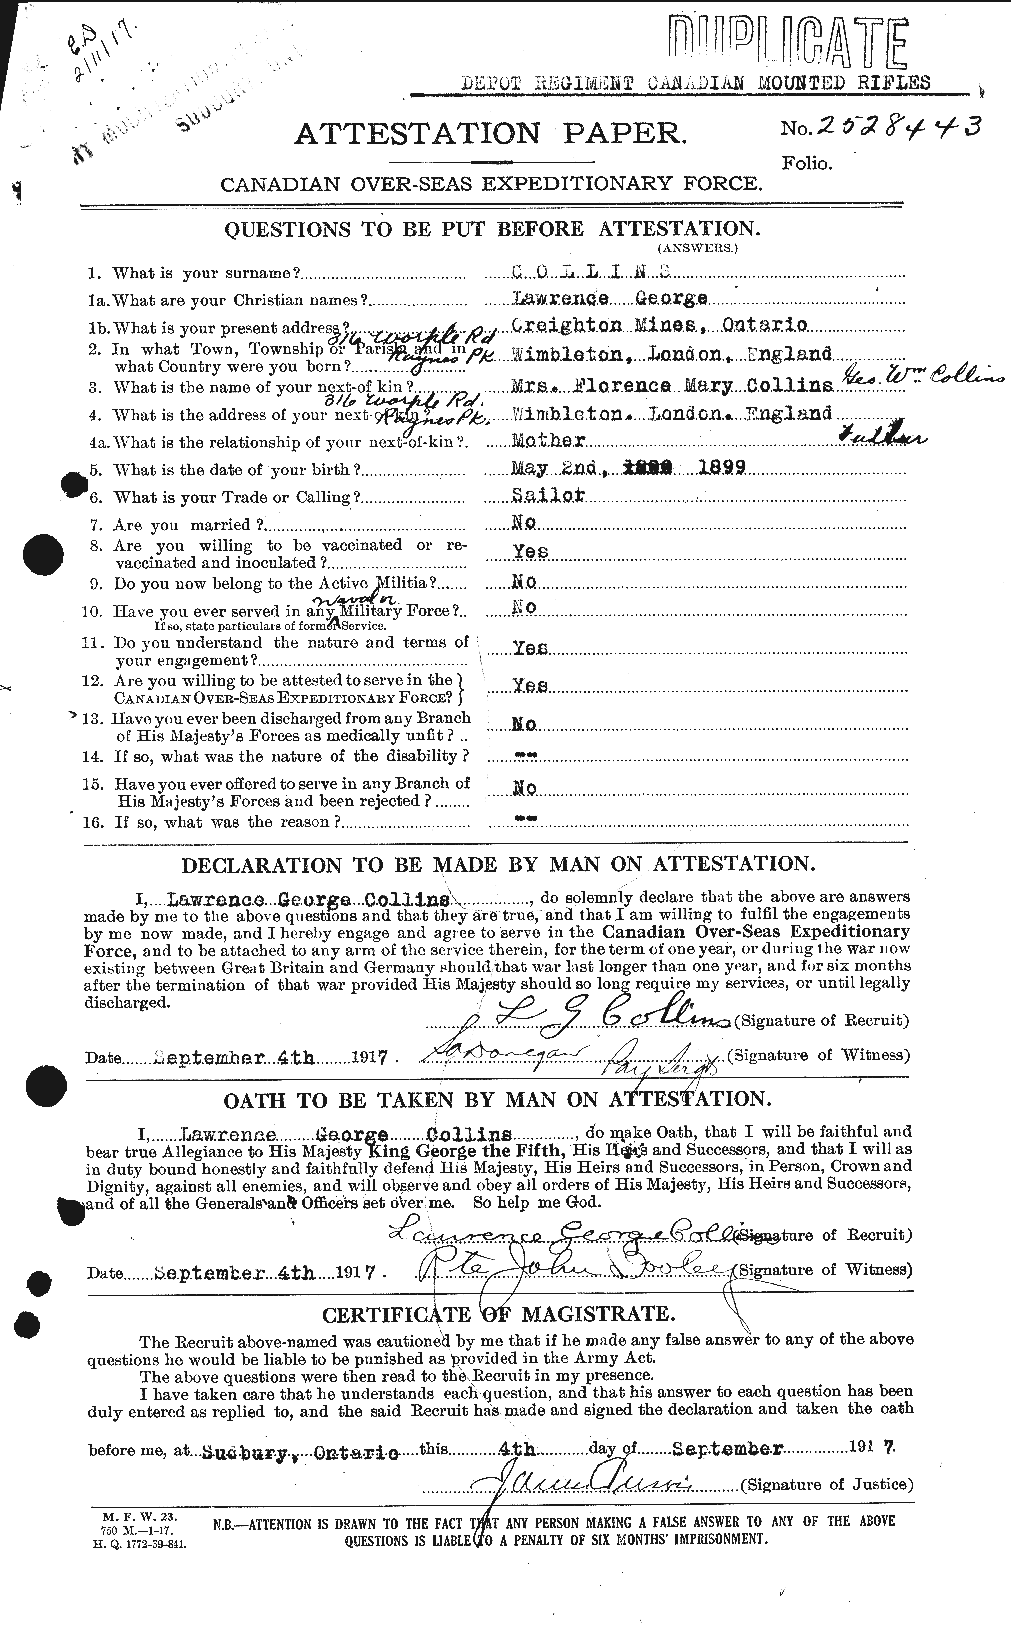 Personnel Records of the First World War - CEF 069501a